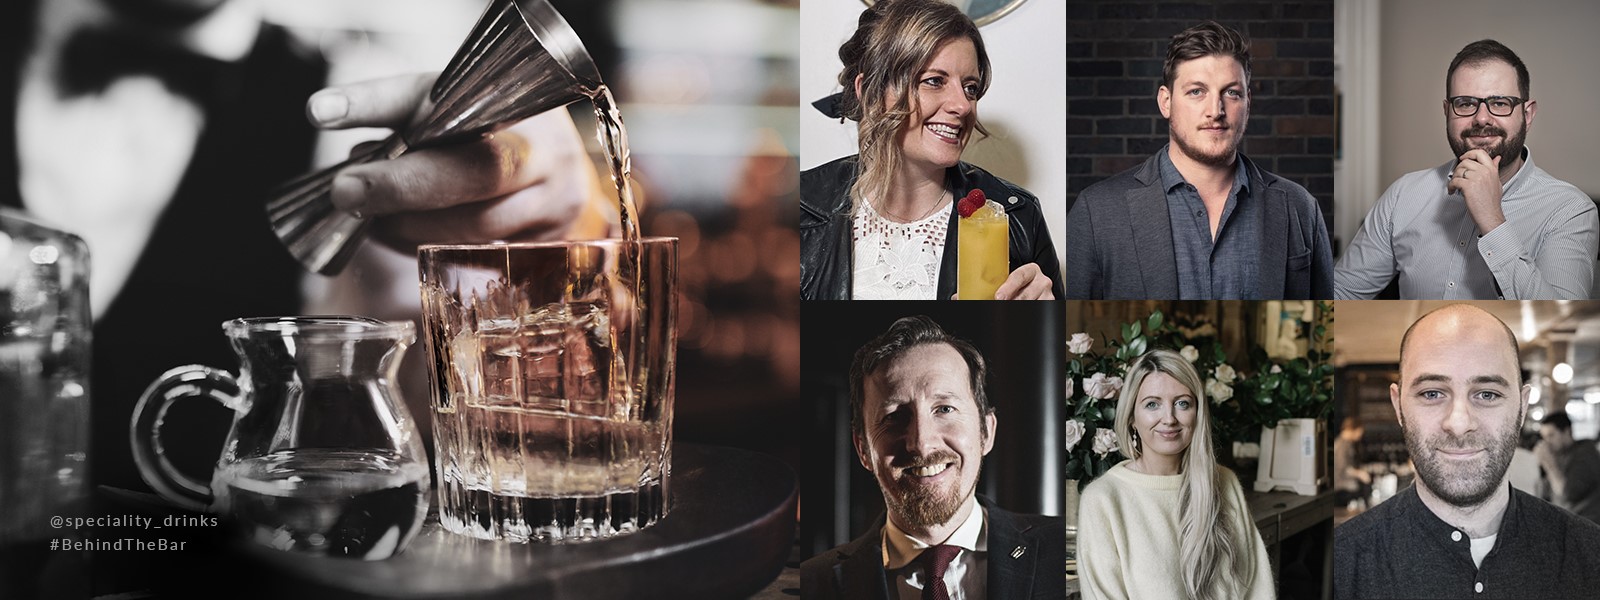 BEHIND THE BAR: CHAMPIONING THE HOSPITALITY INDUSTRY